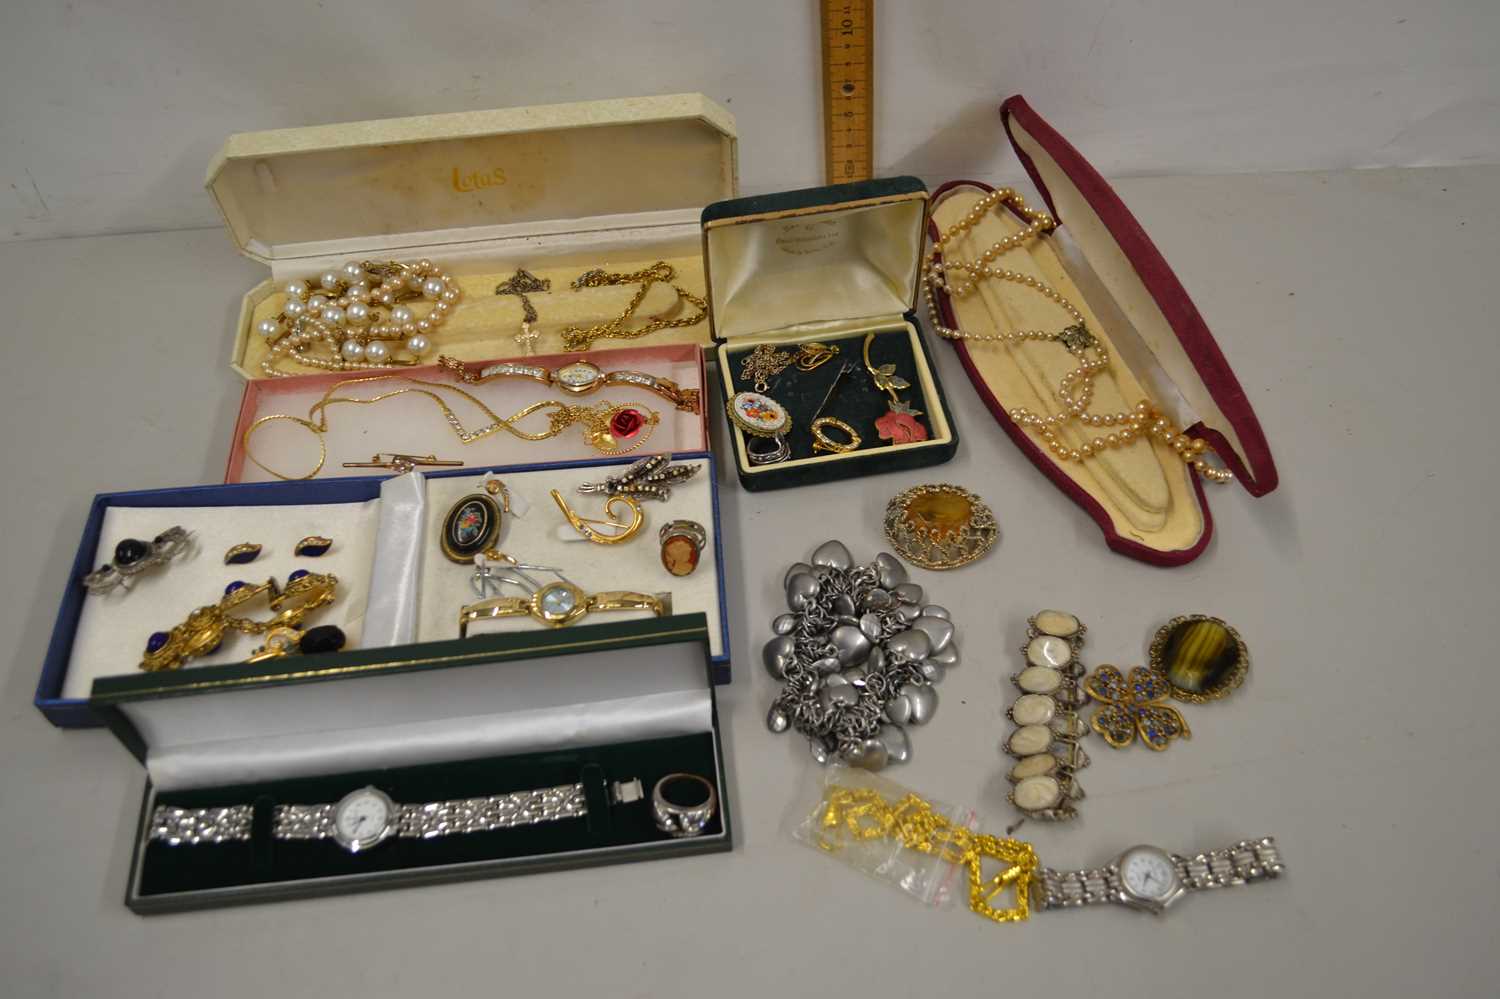 A basket of various costume jewellery